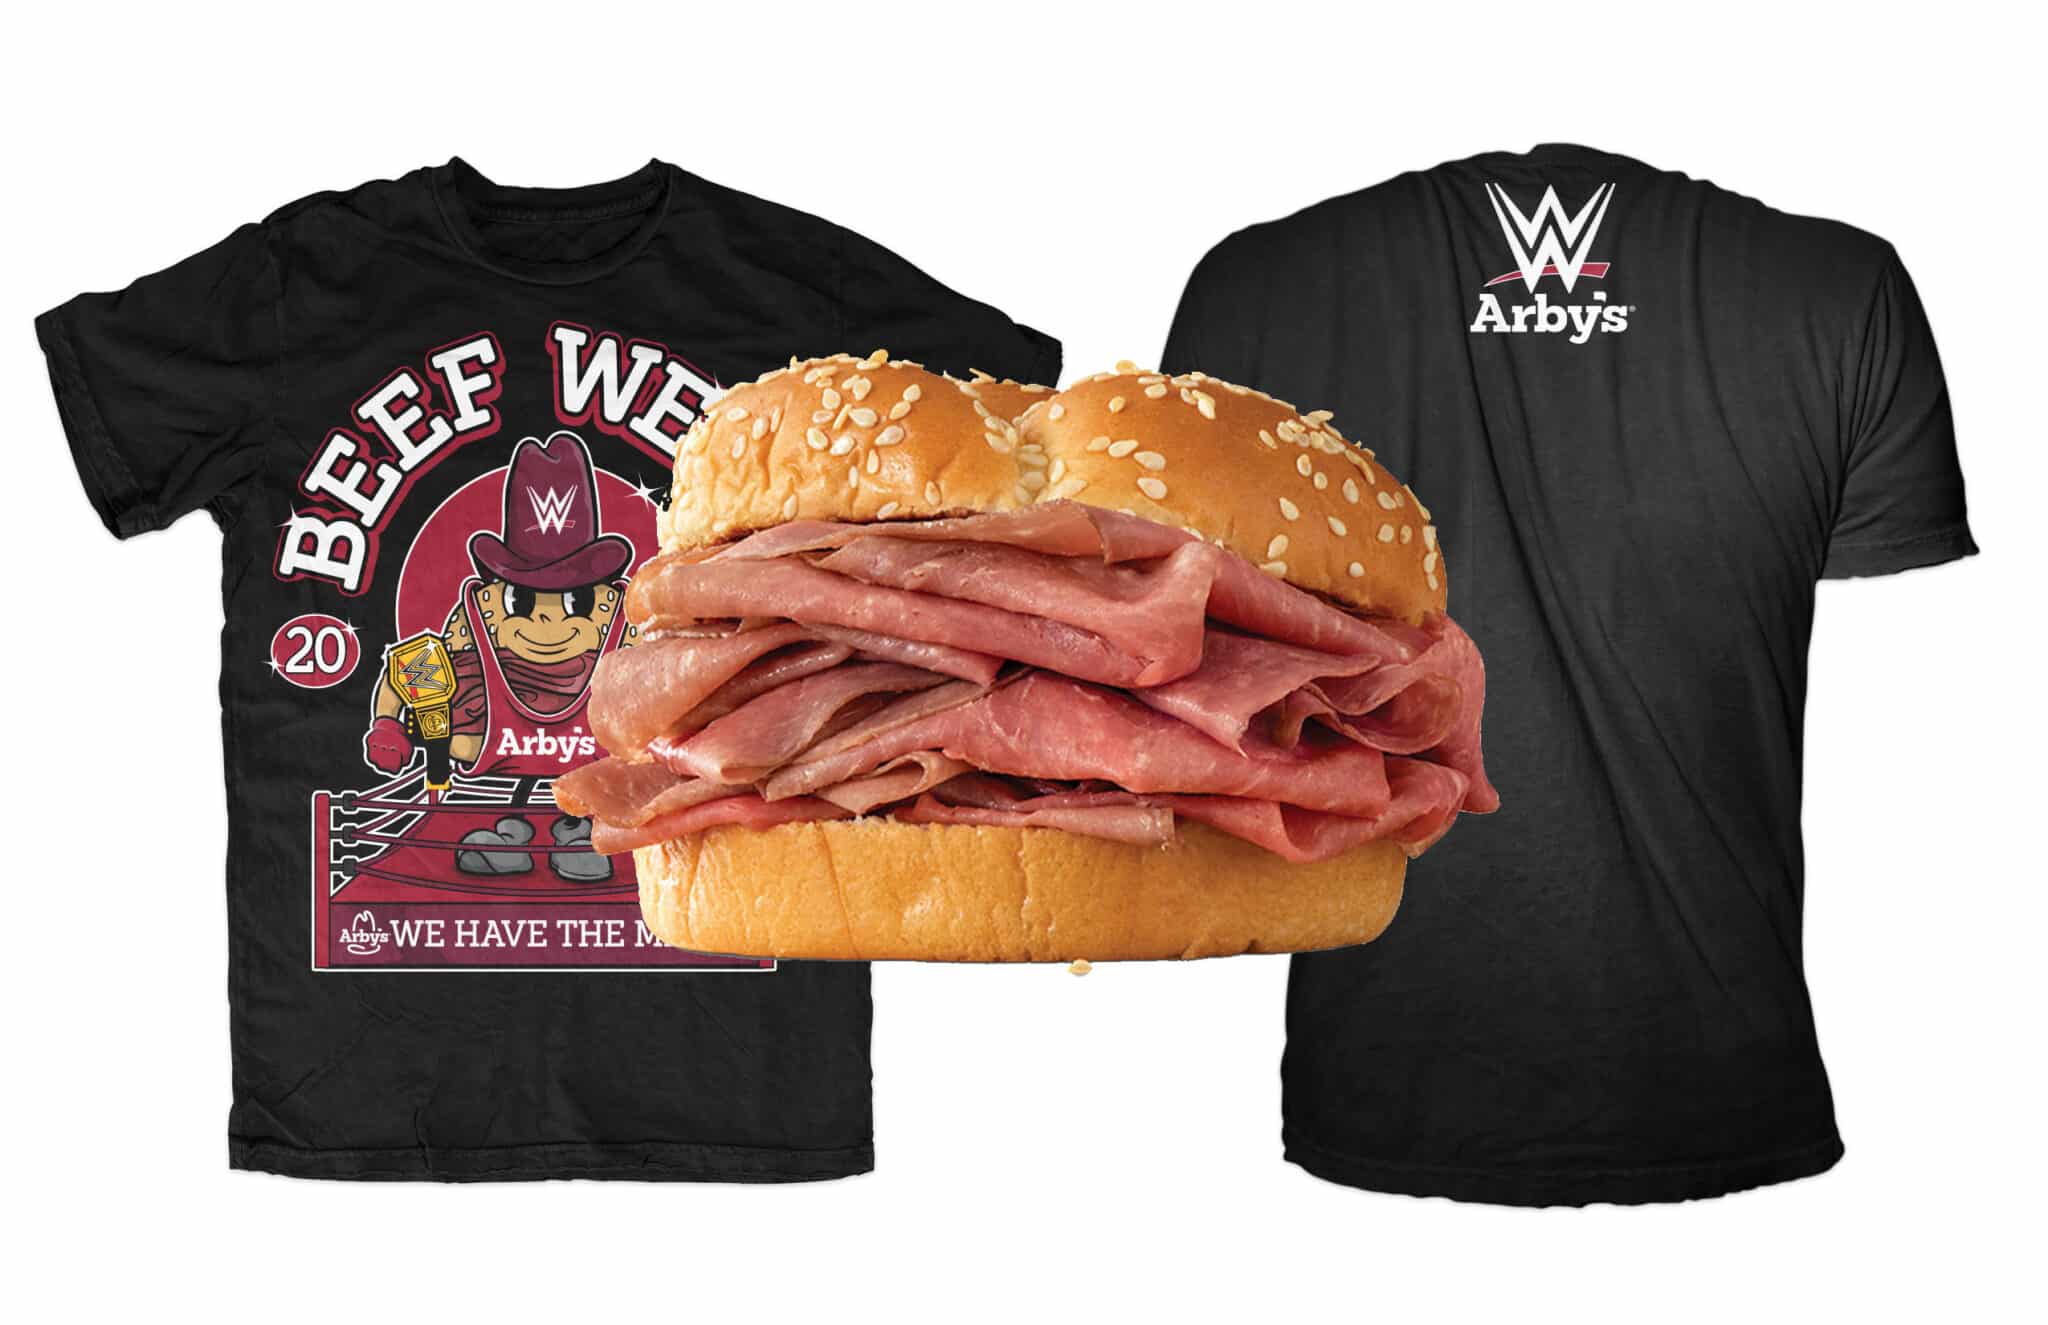 Arby’s Collaborates with WWE Tag Team Champions to Commemorate Beef Week Celebration